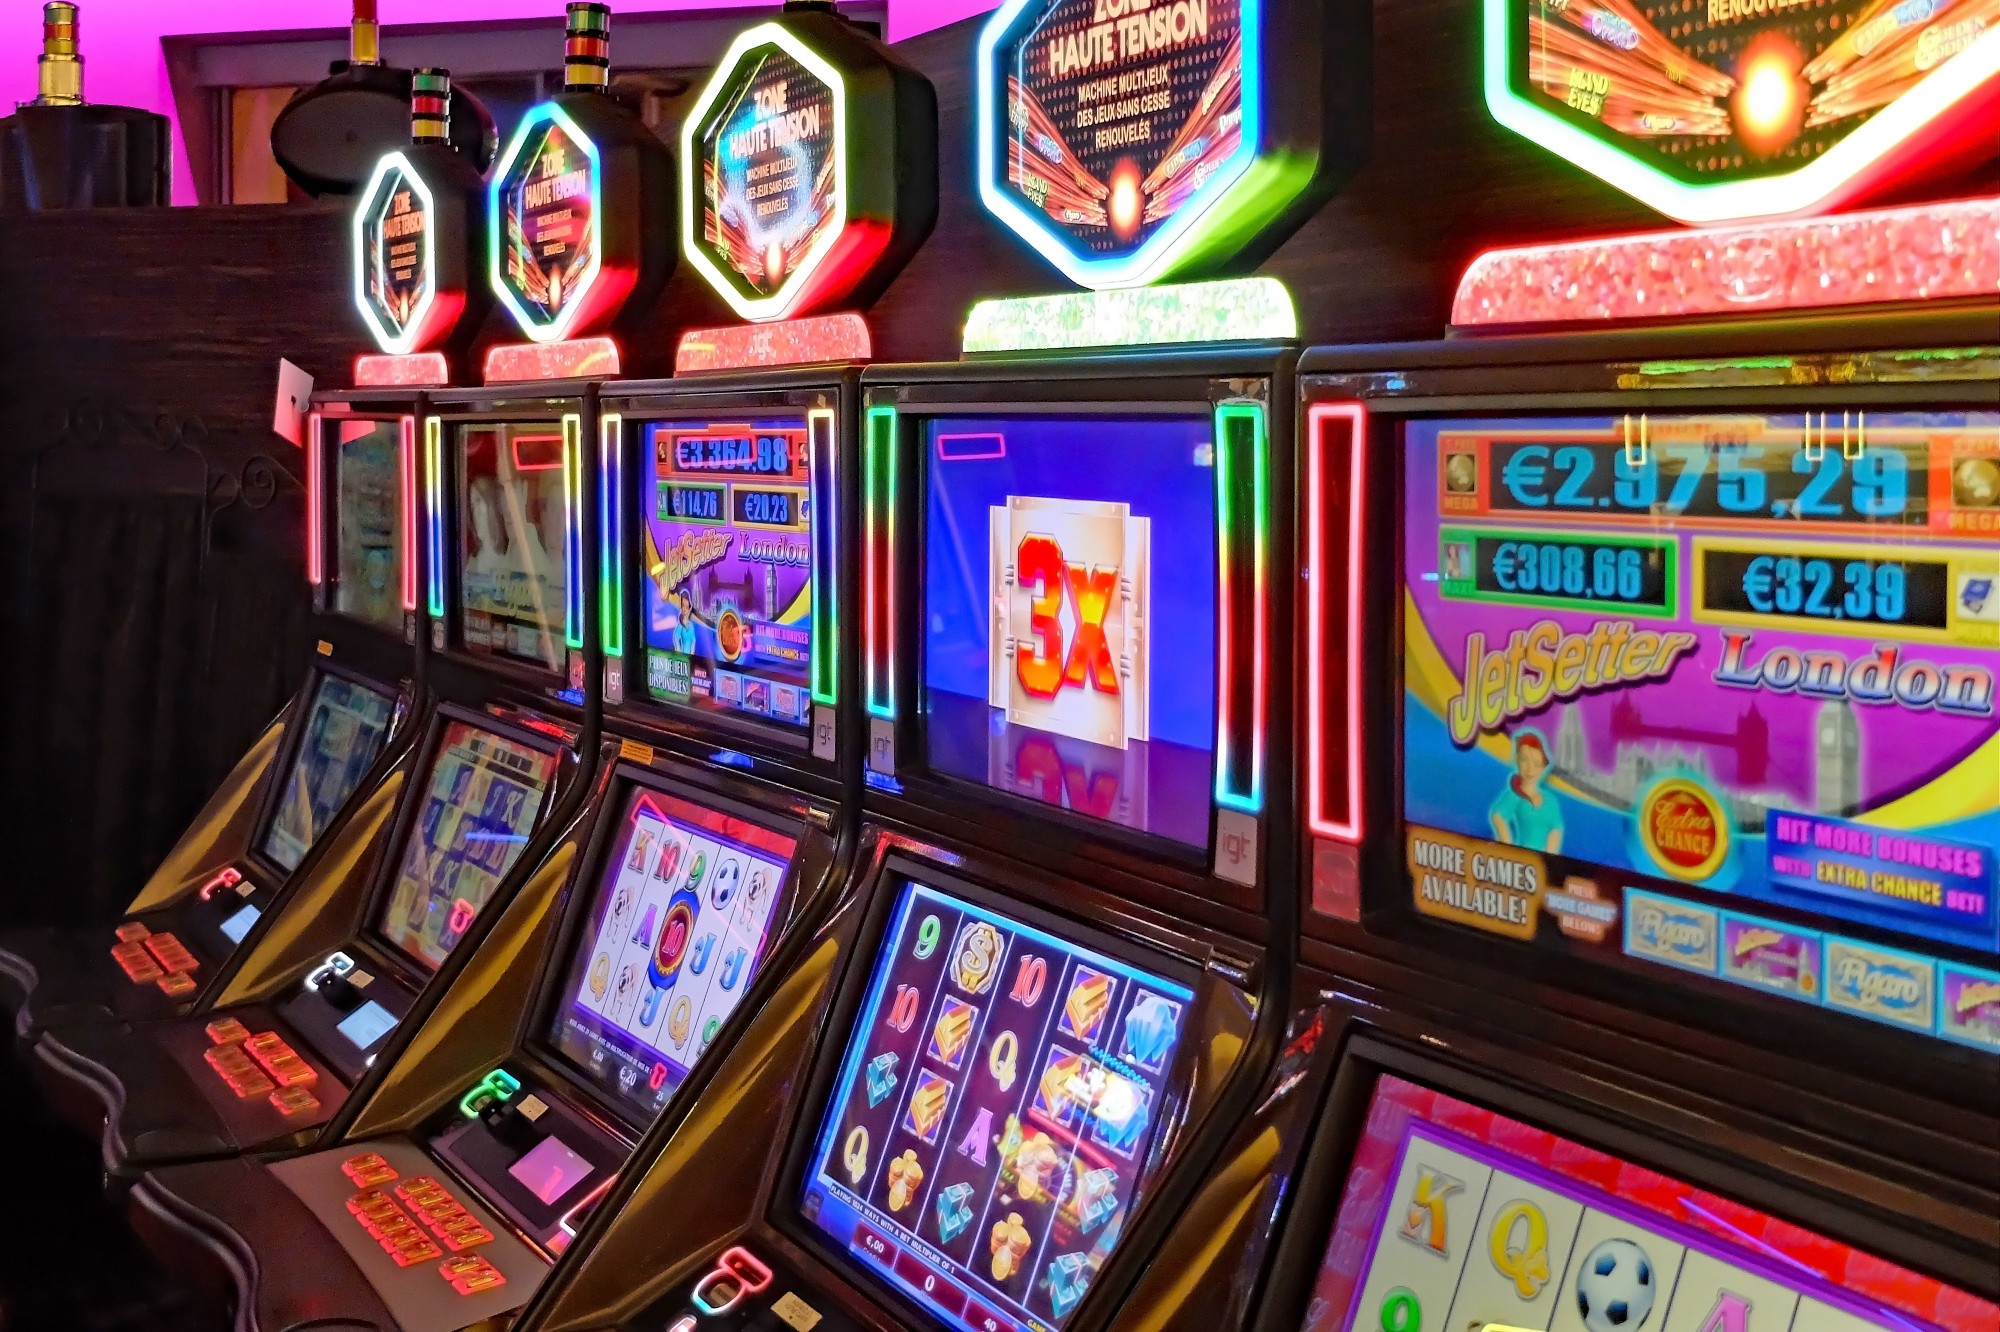 How to win in vegas slot machines